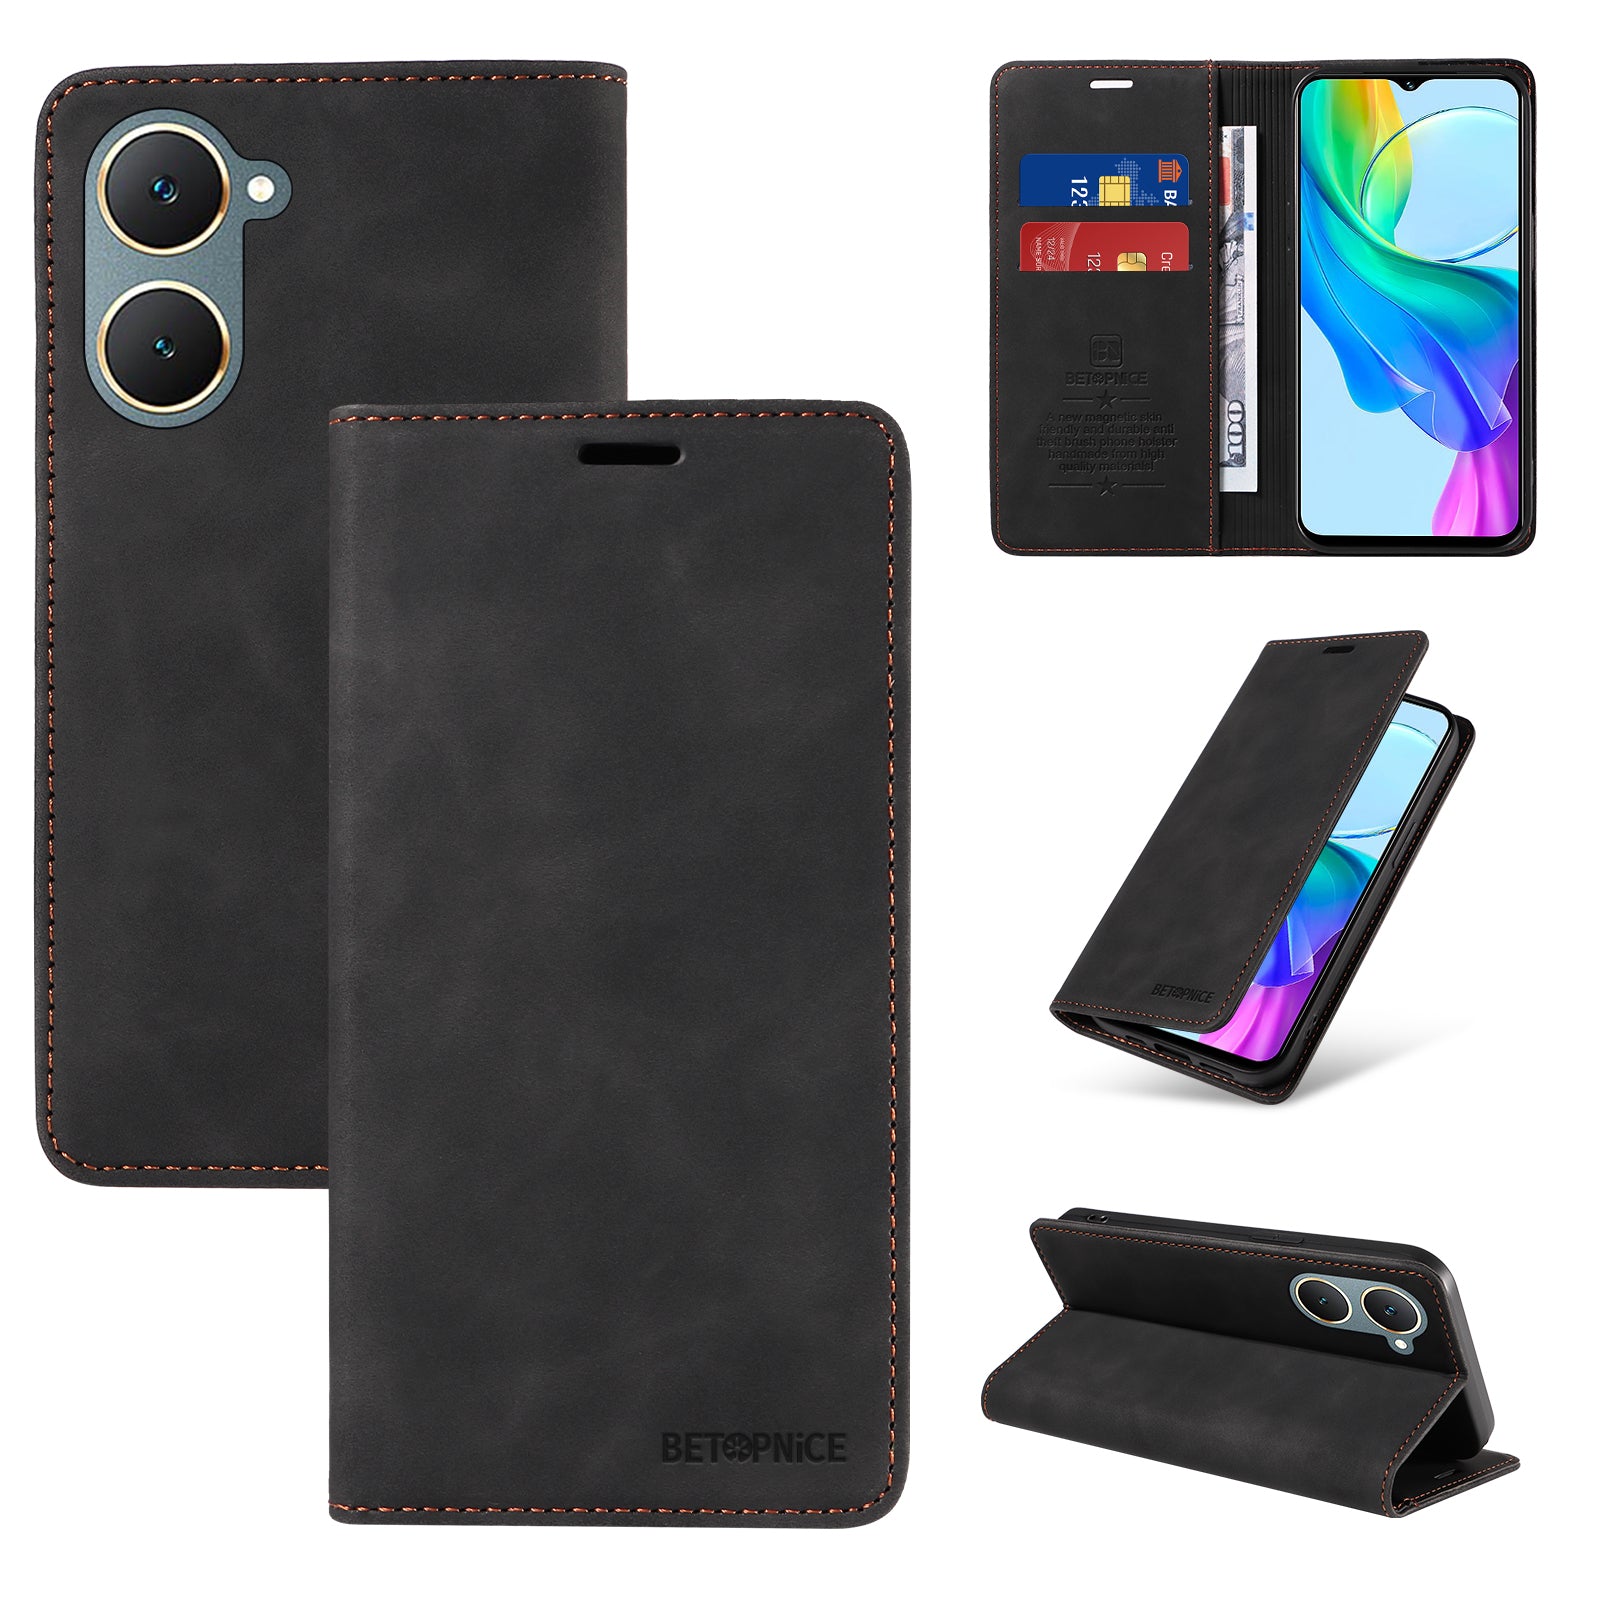 BETOPNICE 003 For vivo Y03 Case RFID Blocking Wallet Leather Flip Phone Cover - Black